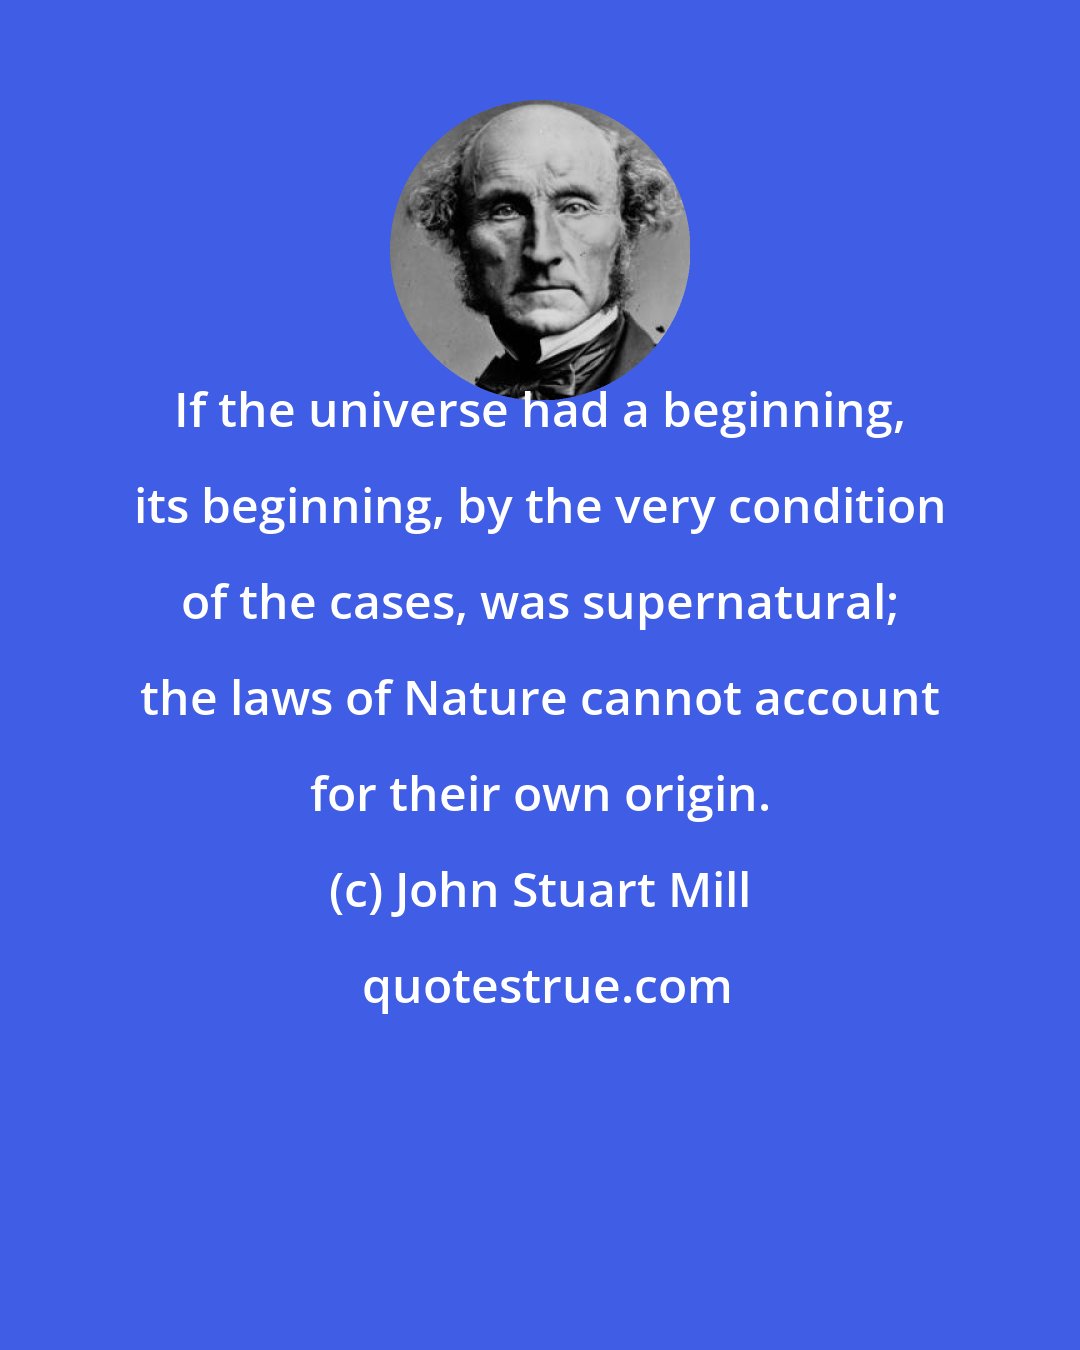 John Stuart Mill: If the universe had a beginning, its beginning, by the very condition of the cases, was supernatural; the laws of Nature cannot account for their own origin.